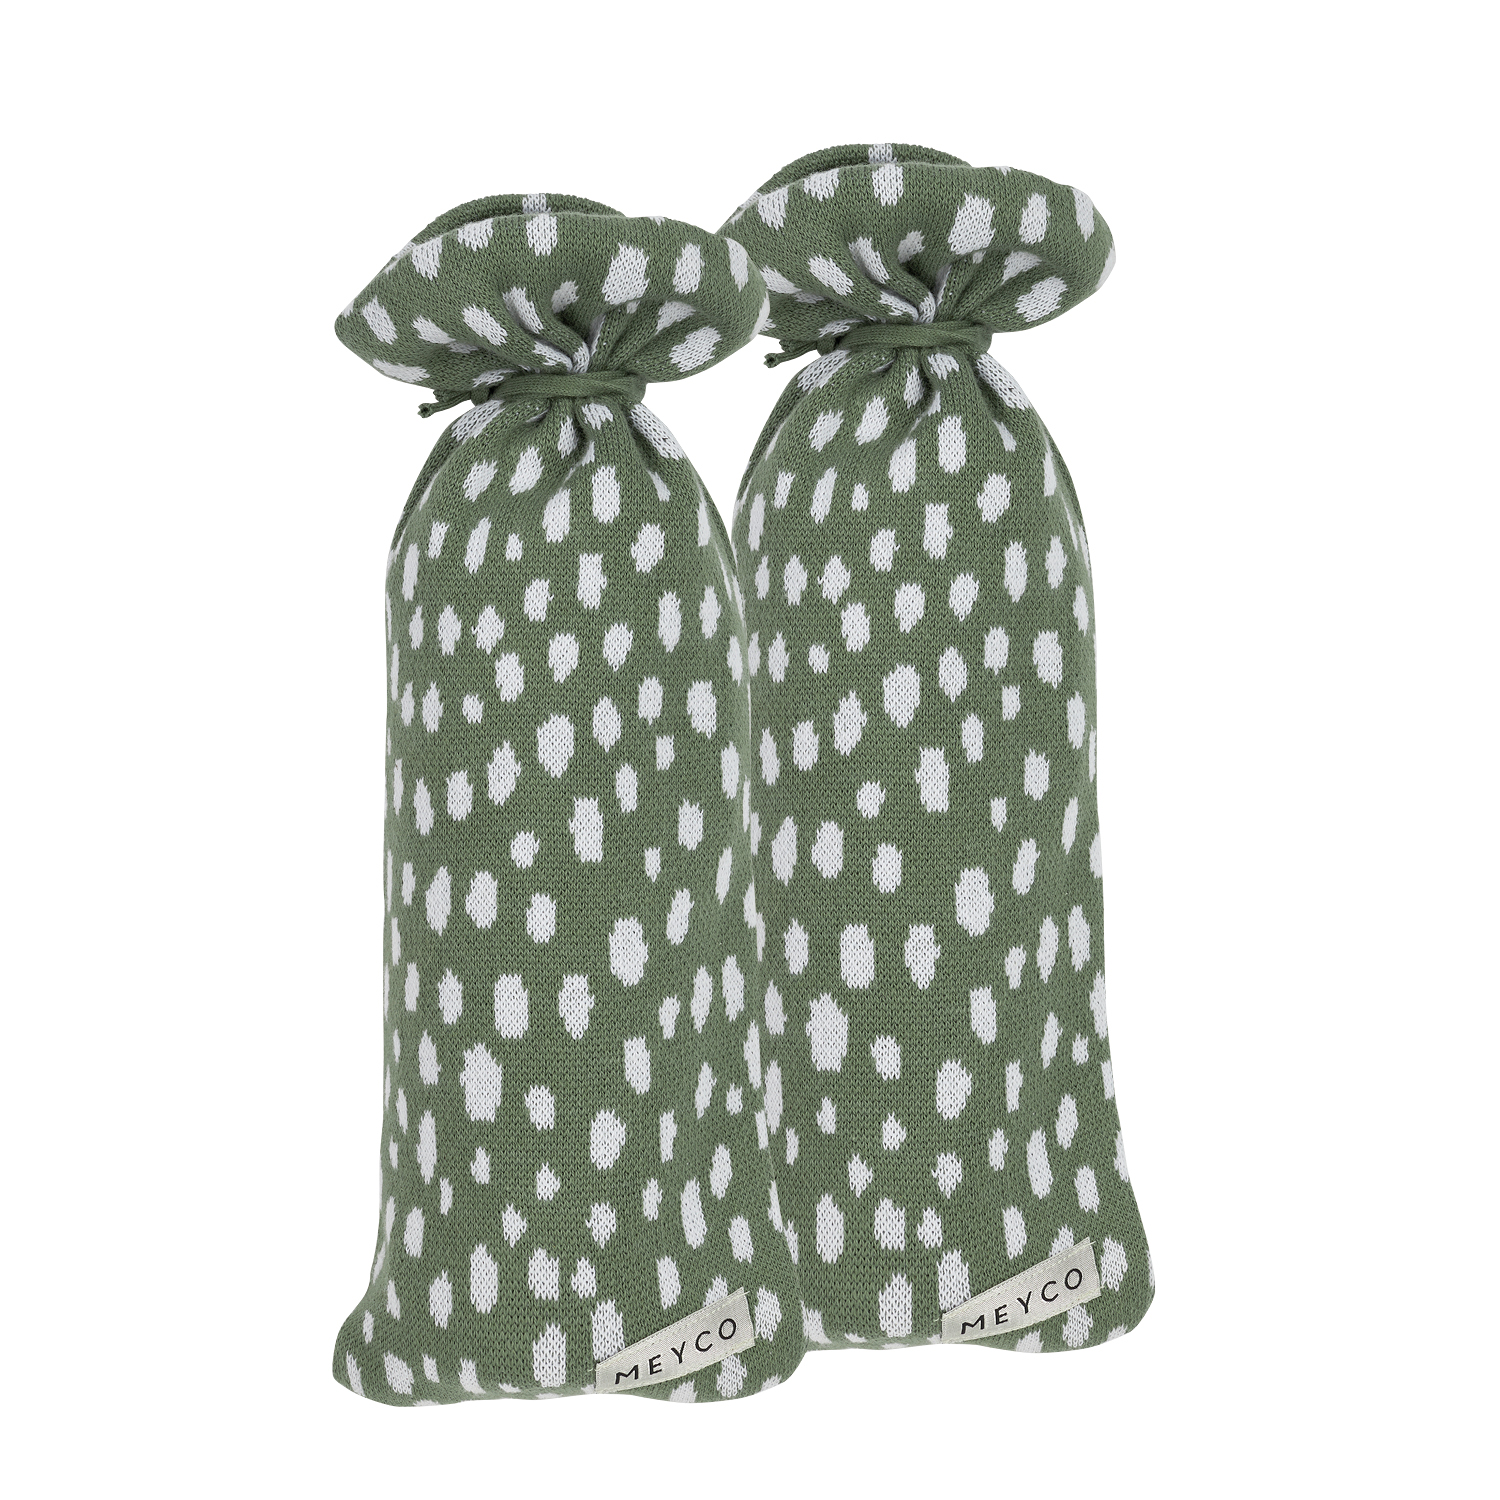 Hot water bottle cover 2-pack Cheetah - forest green